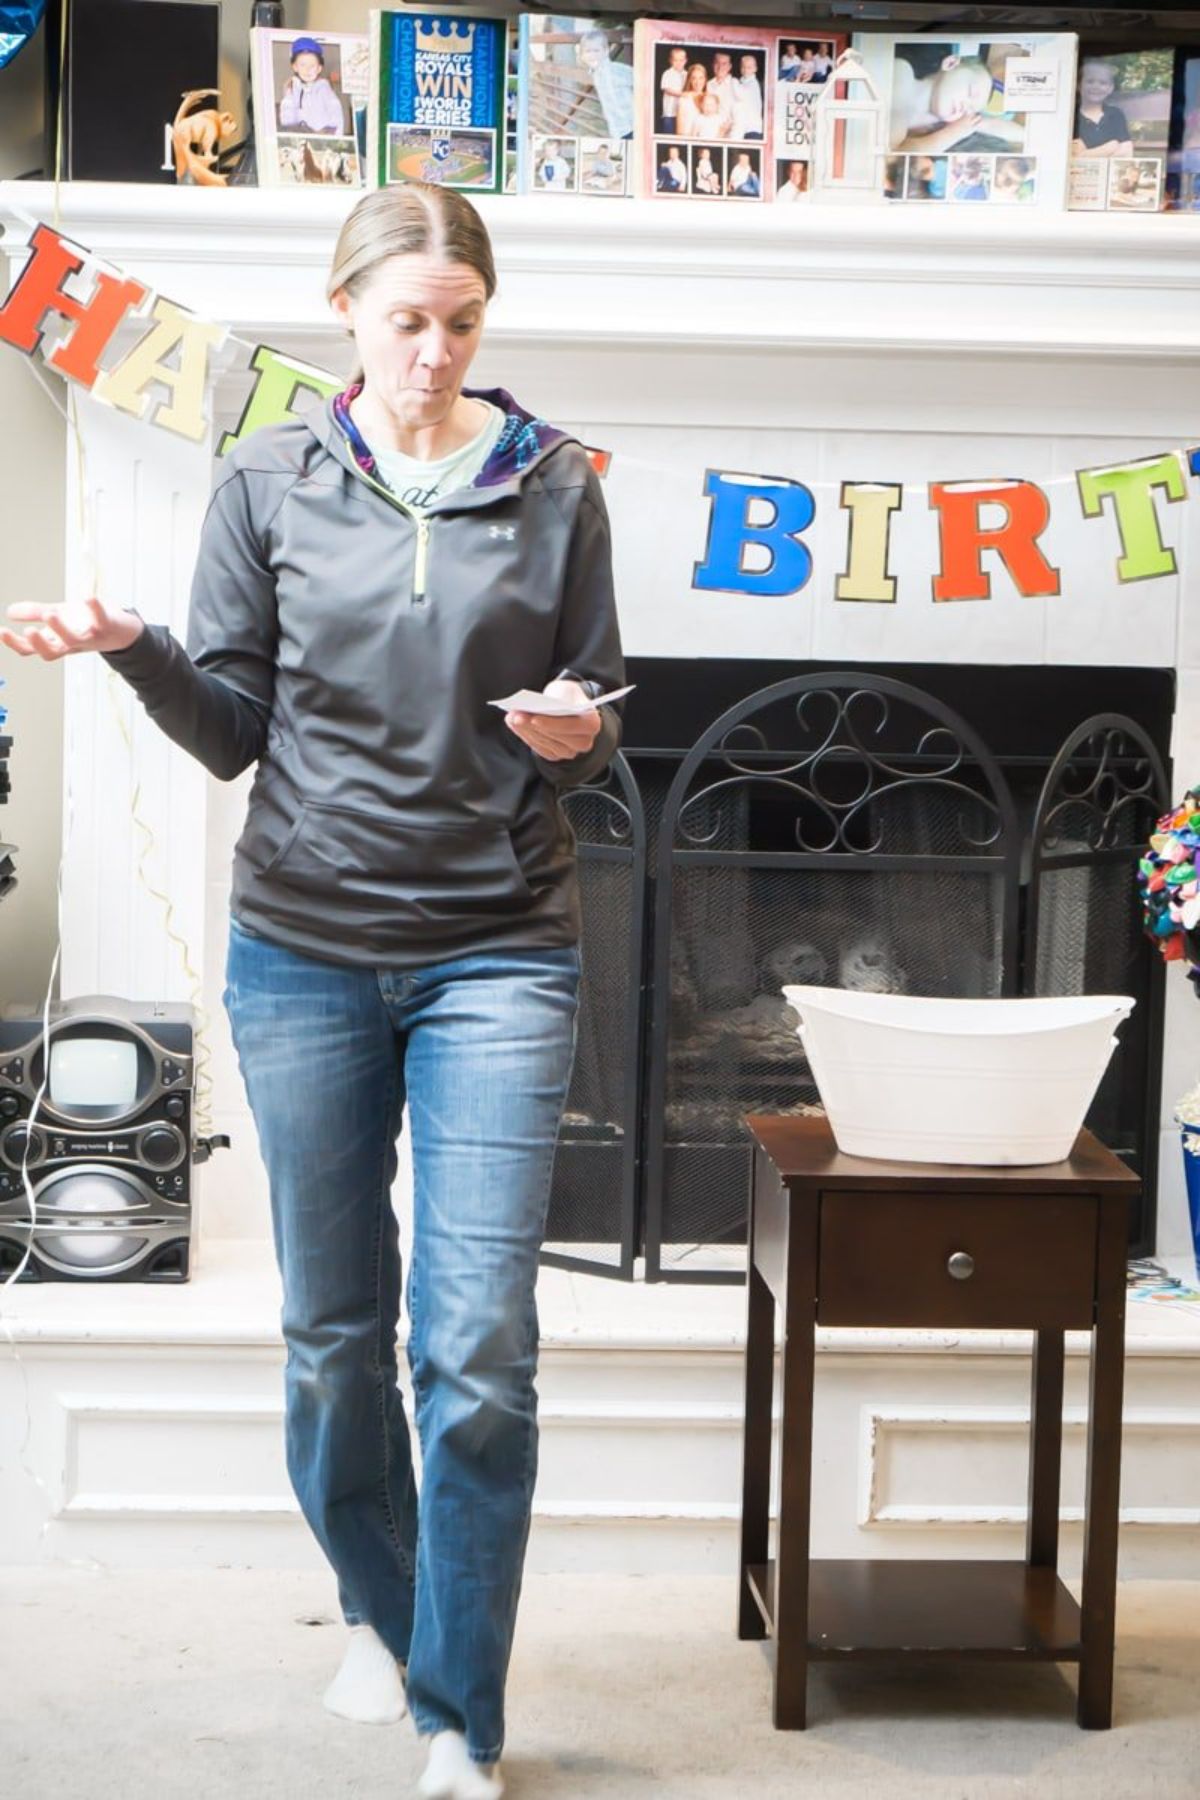 awoman is standing infront of a fireplace filled with birthday cards and draped with a happy birthday banner, She is holding a piece of paper